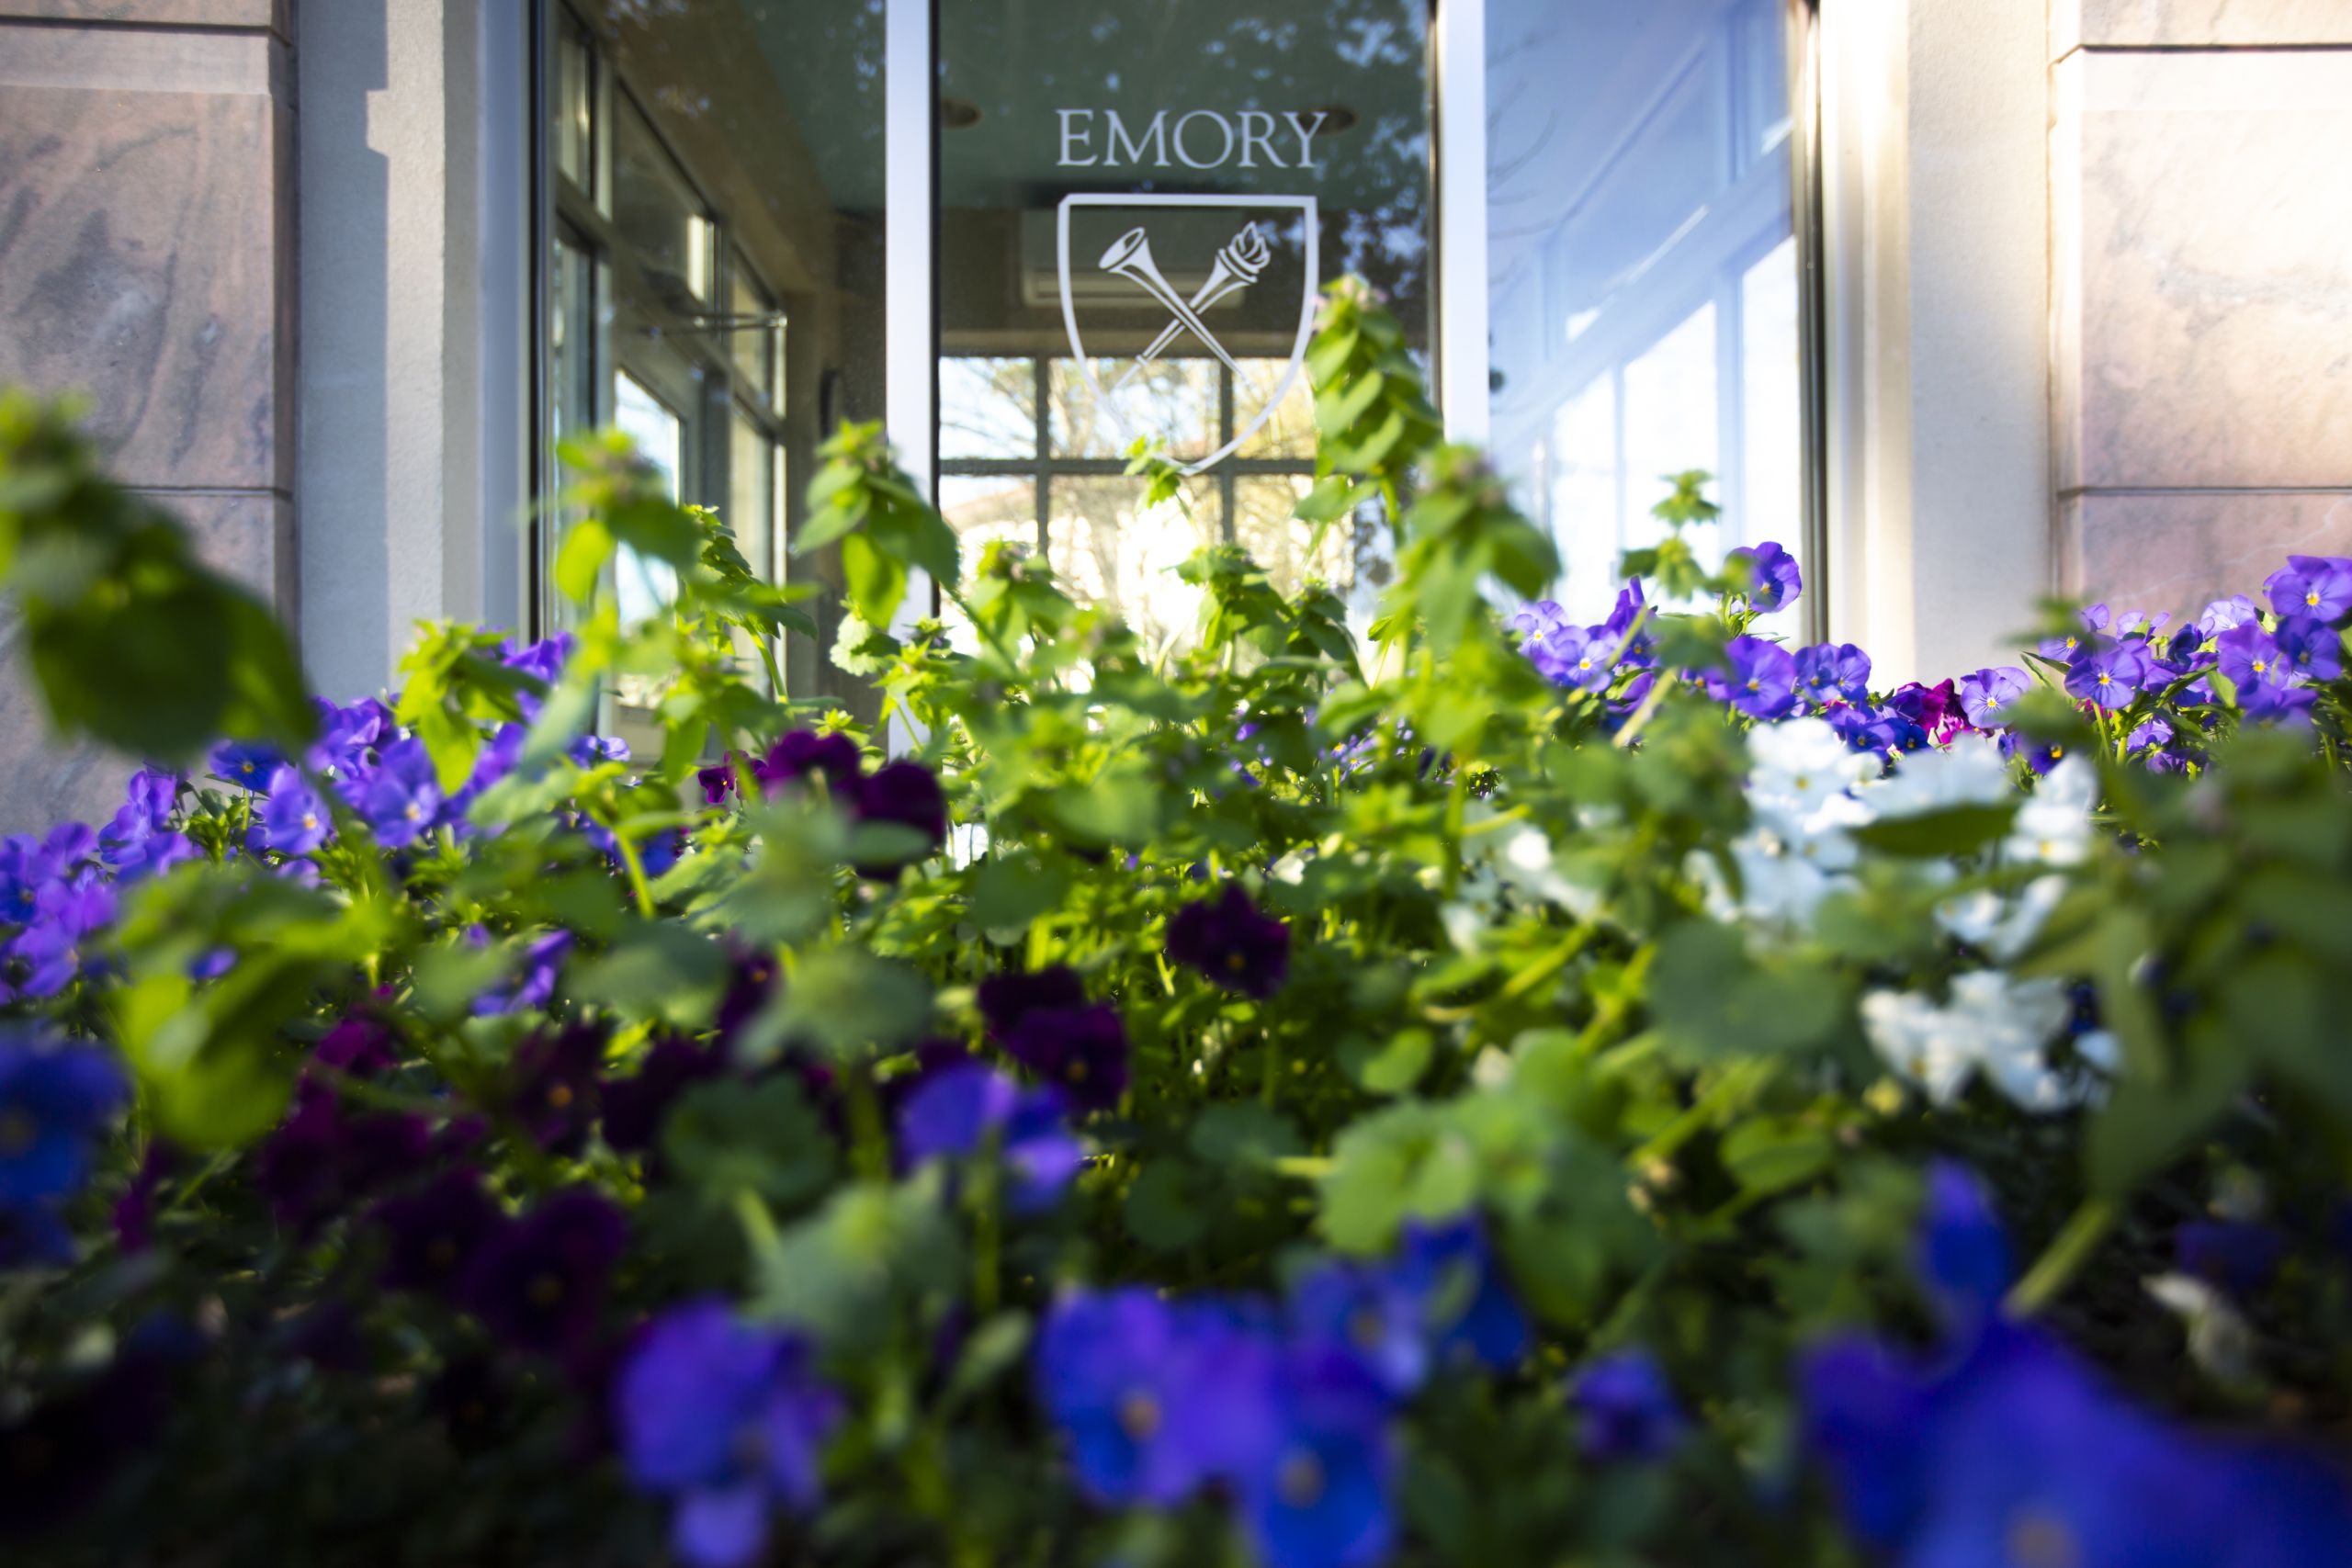 The Emory shield on a window with flowers growing in the foreground